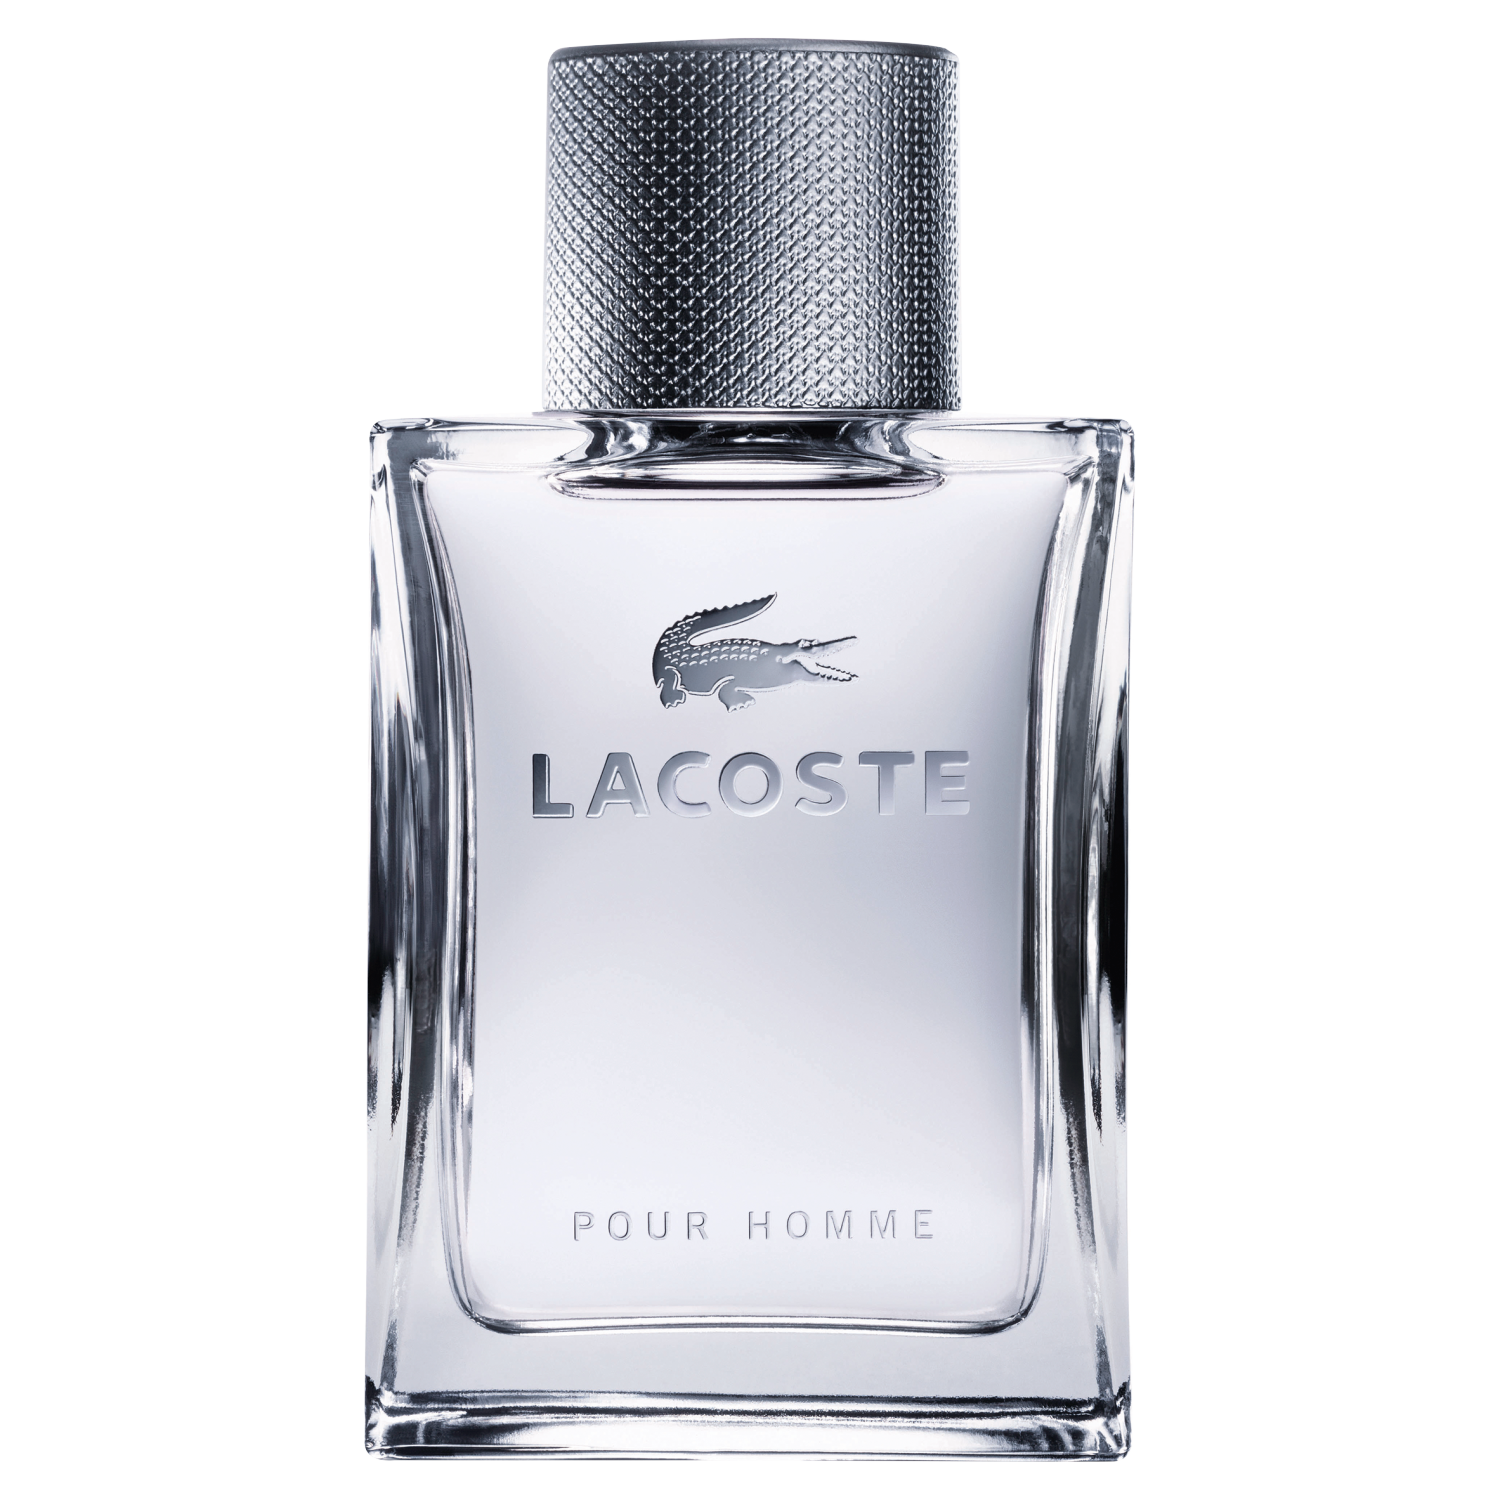 Pour homme для мужчин. Lacoste pour homme men 50ml EDT. Lacoste pour homme EDT 100 ml. Lacoste Lacoste pour homme 100 мл. Lacoste homme мужской Парфюм.